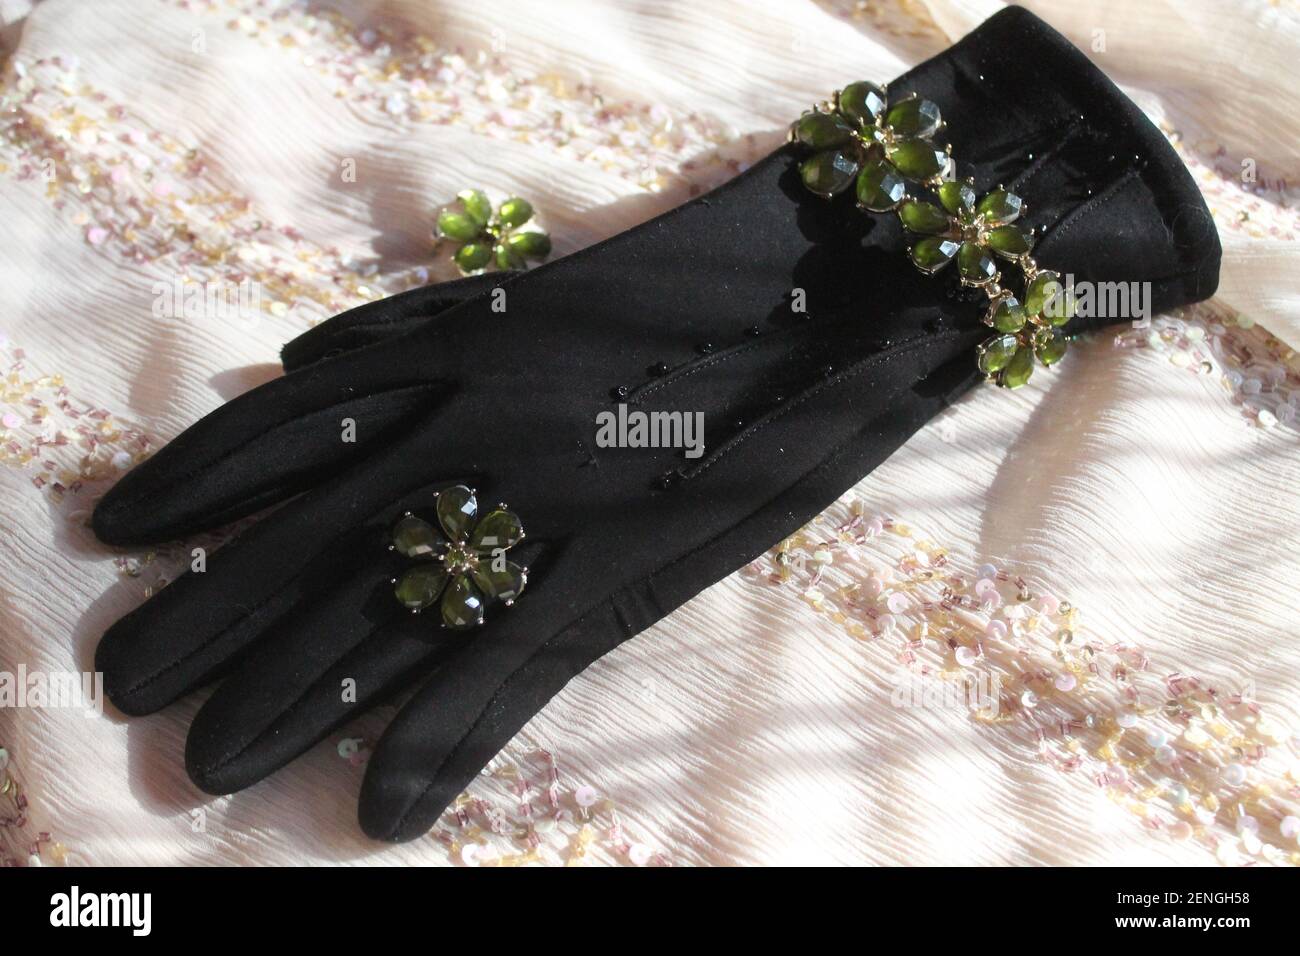 beautiful jewelry bracelet and ring in shape of daisy flower  lay on black woman's glove Stock Photo